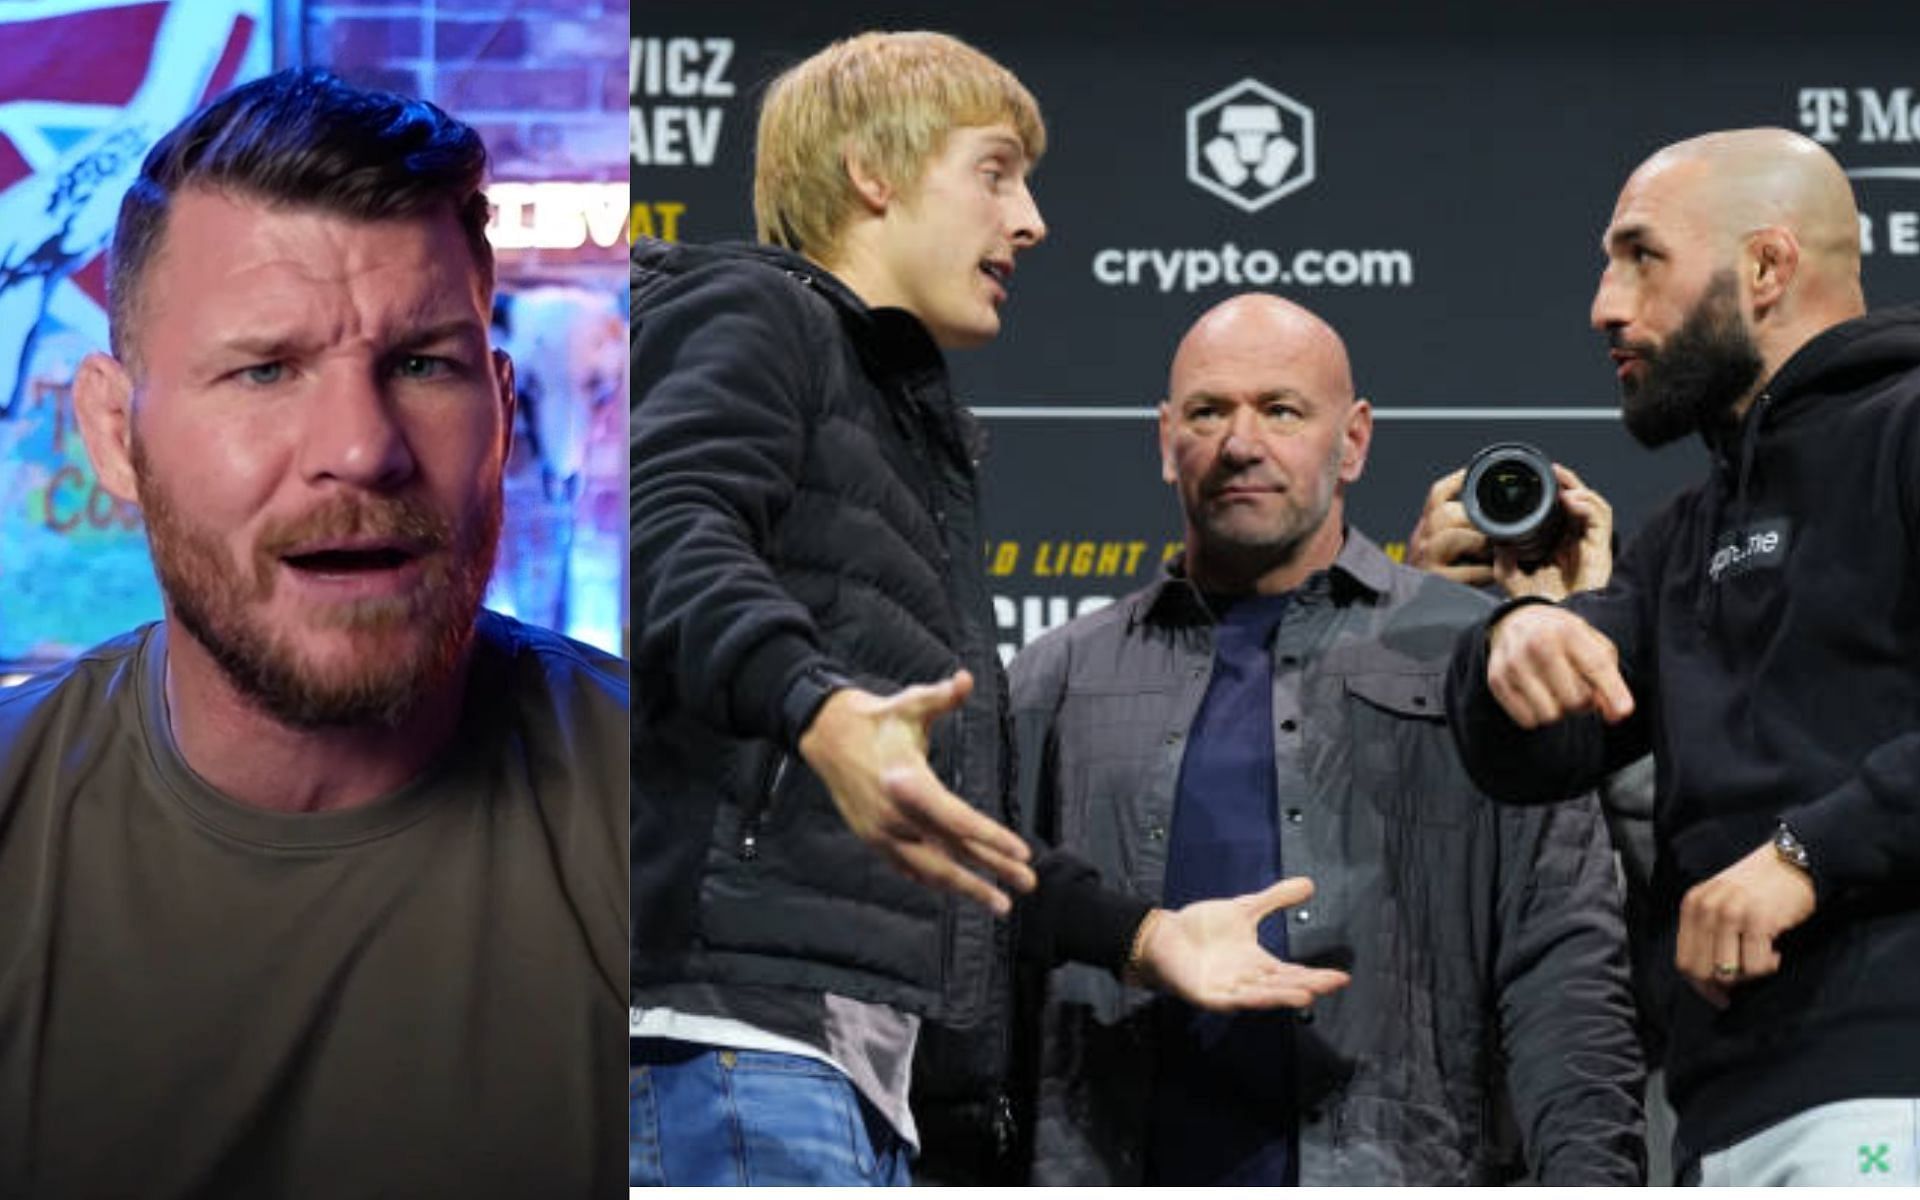 Michael Bisping (left) [Image courtesy: @michaelbisping on YouTube] and Paddy Pimblett and Jared Gordon face-off at UFC 282 press conference (right)